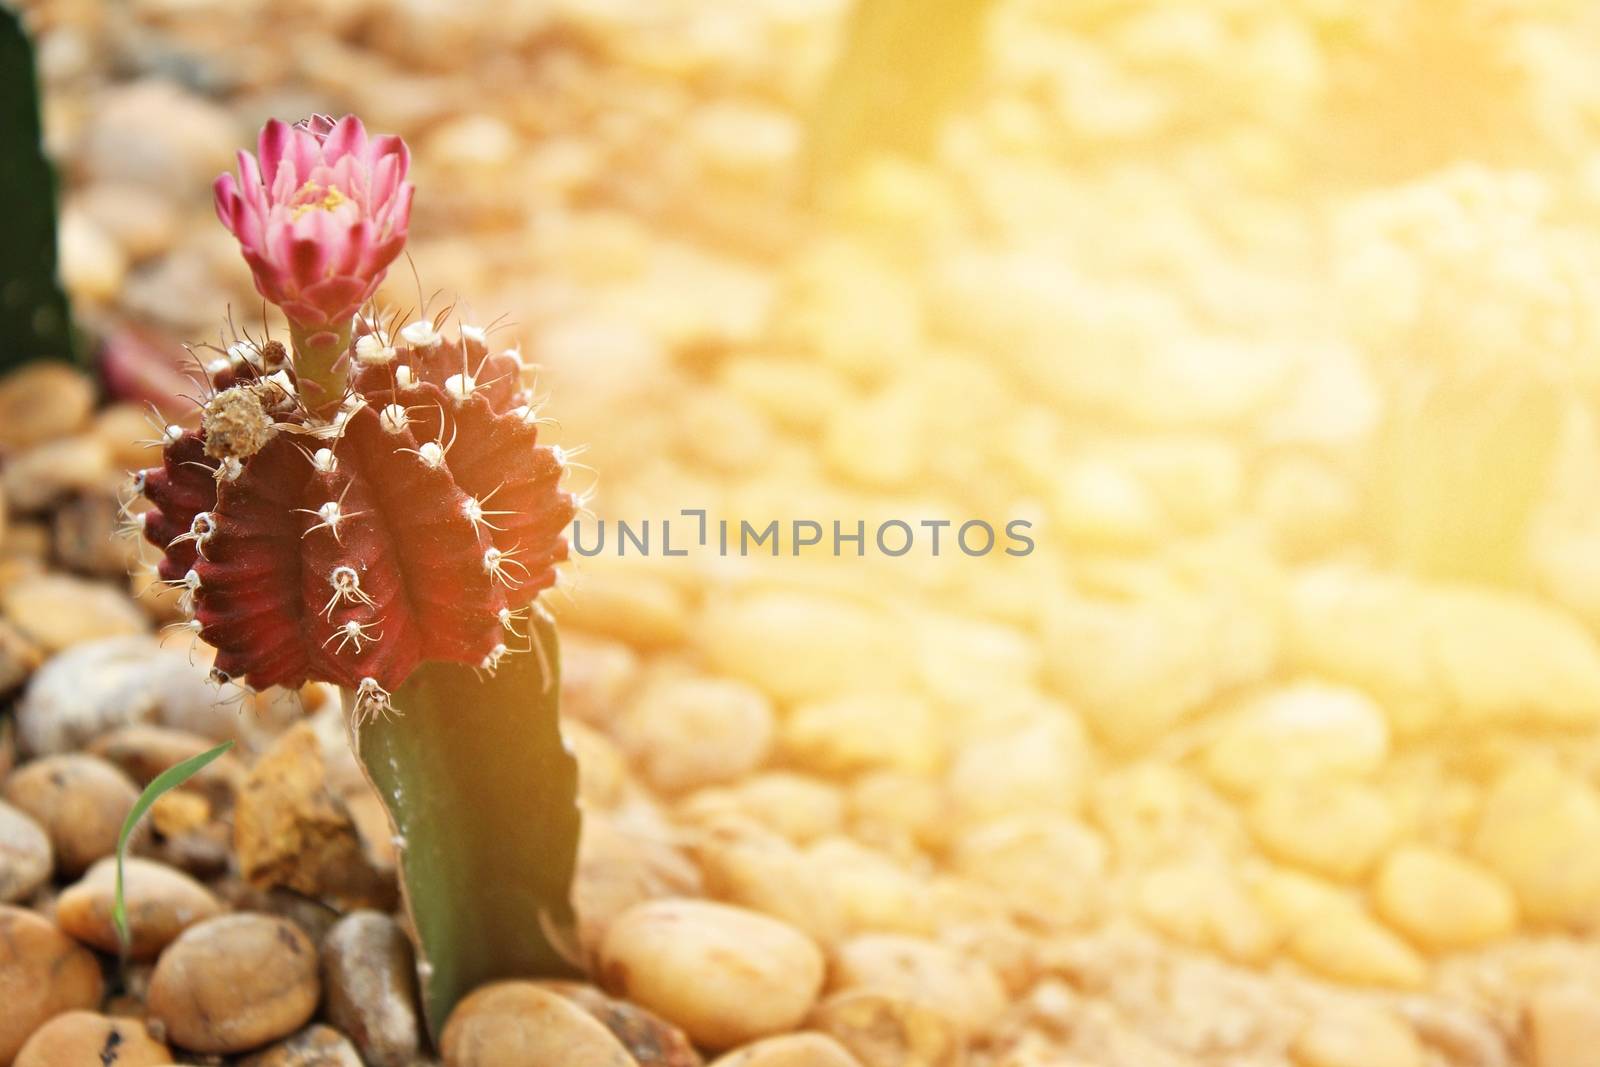 Nature background concept : Small cactus blooming flower in cactus garden